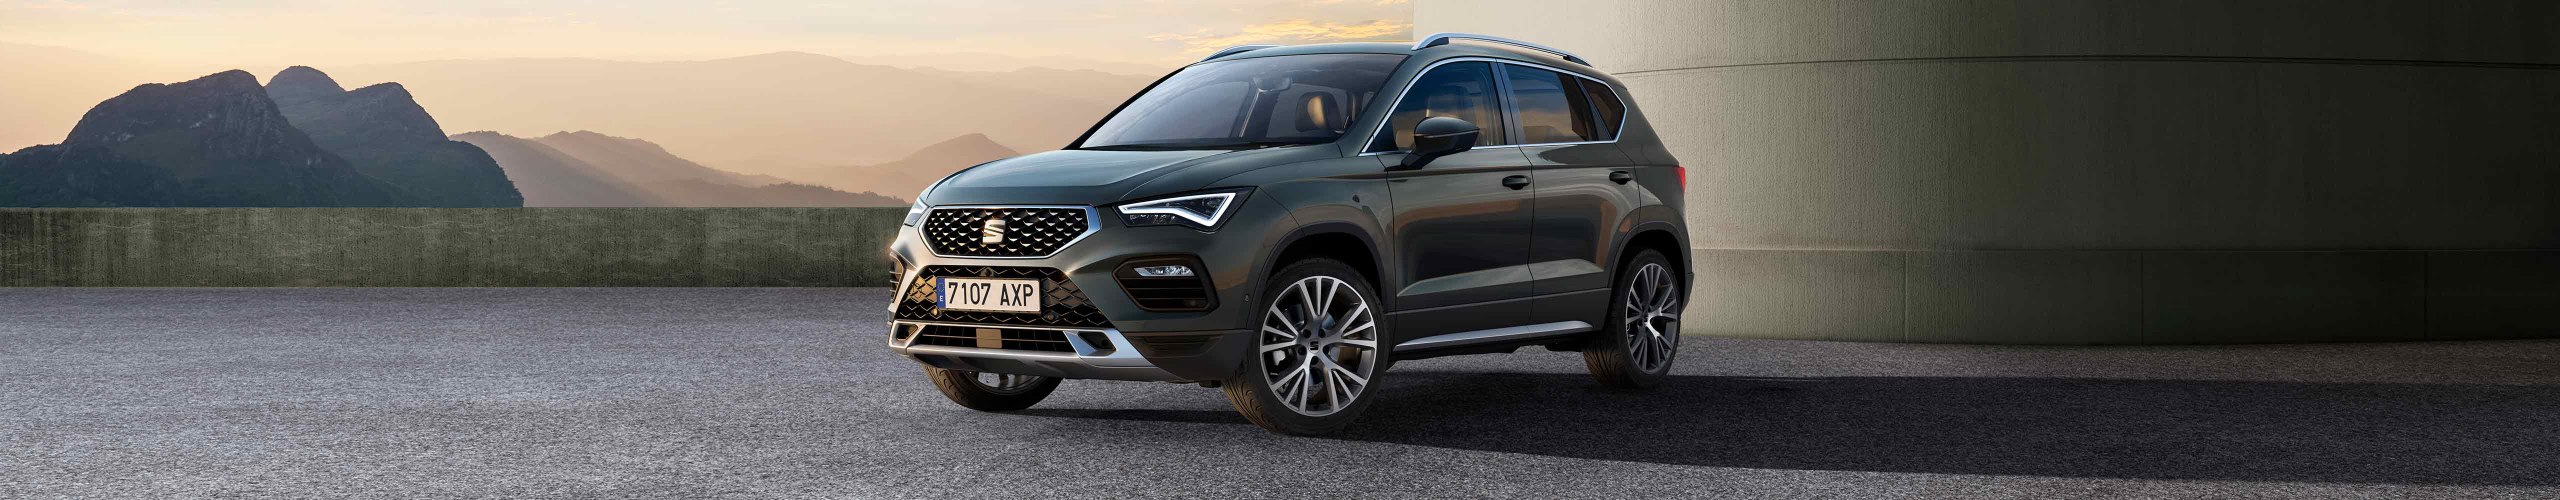 New SEAT Ateca in dark camouflage exterior front side view with reflex silver elements